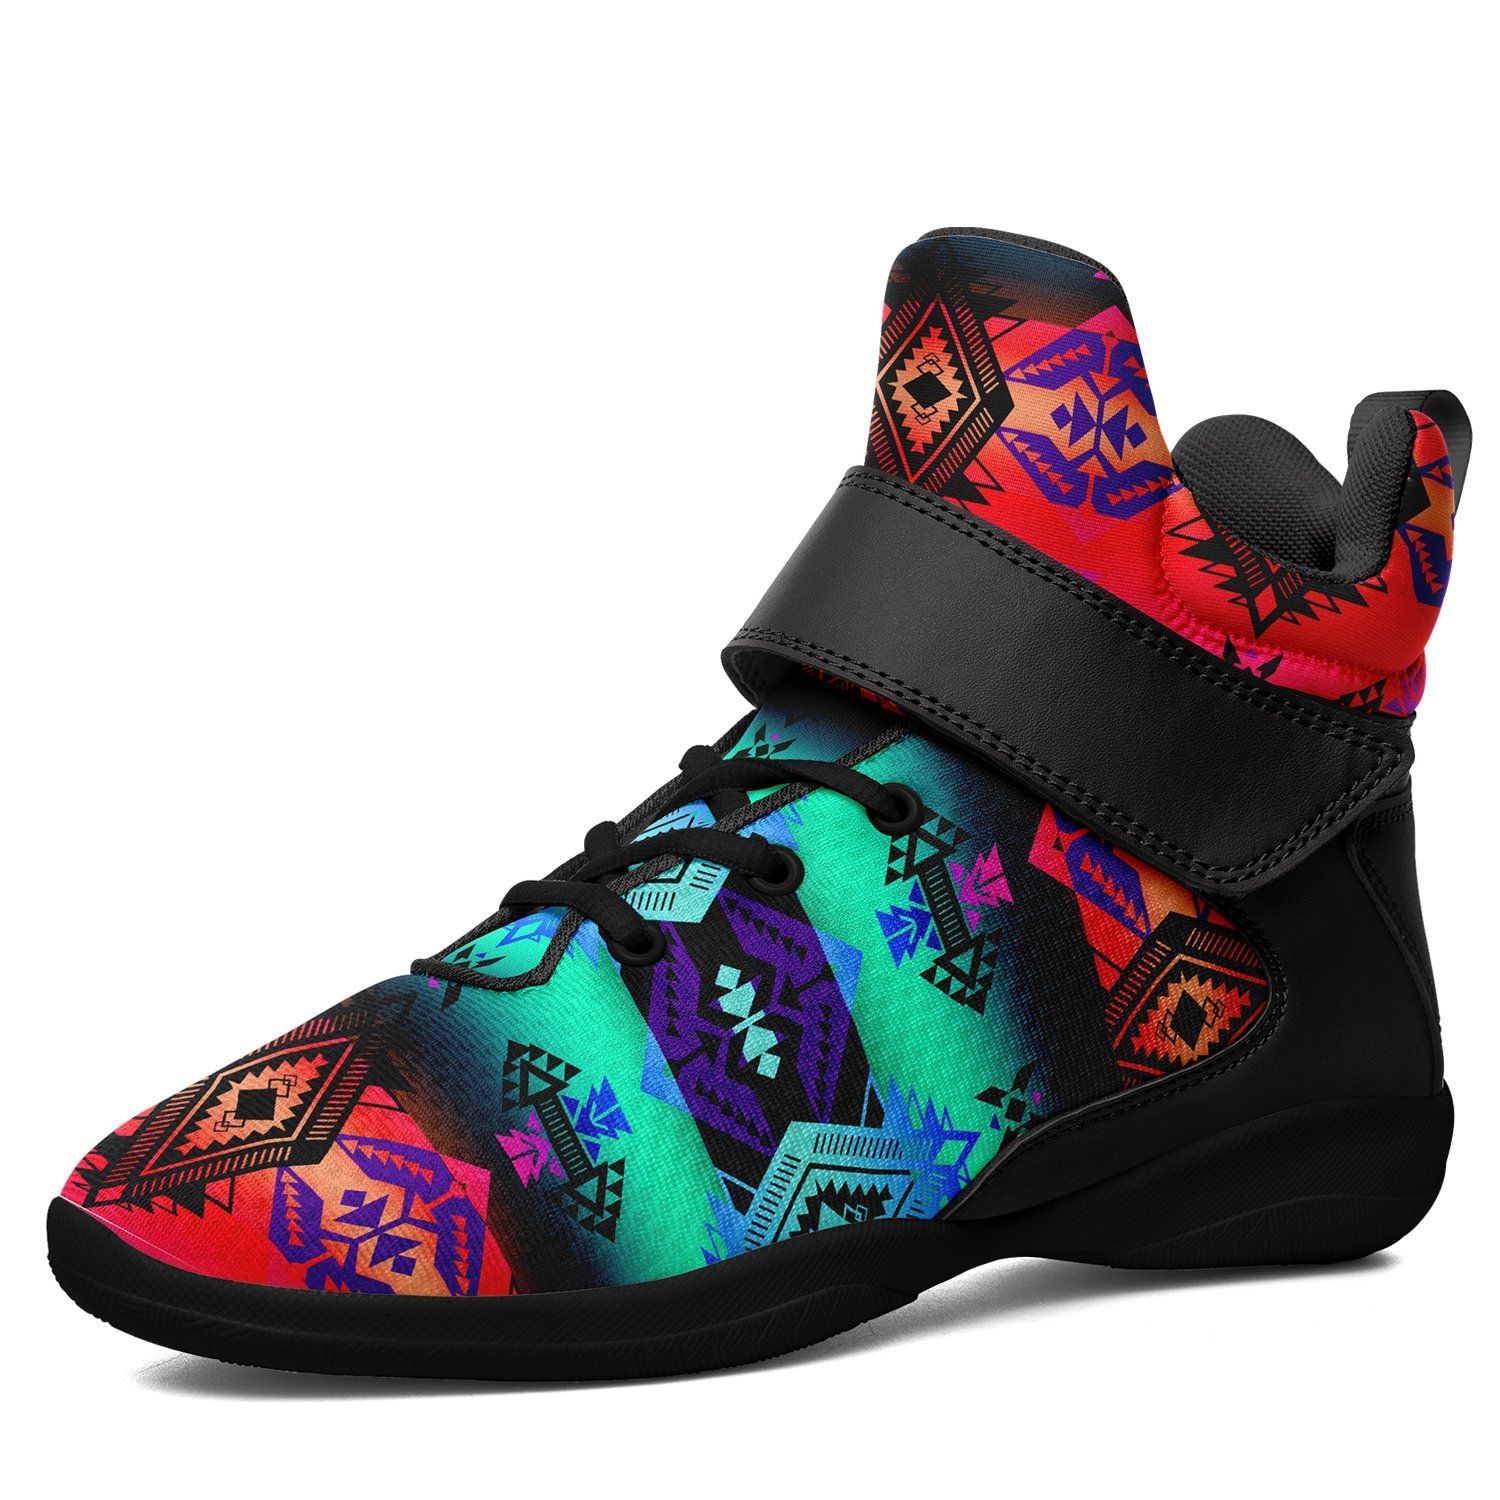 Sovereign Nation Sunrise Ipottaa Basketball / Sport High Top Shoes 49 Dzine US Women 4.5 / US Youth 3.5 / EUR 35 Black Sole with Black Strap 